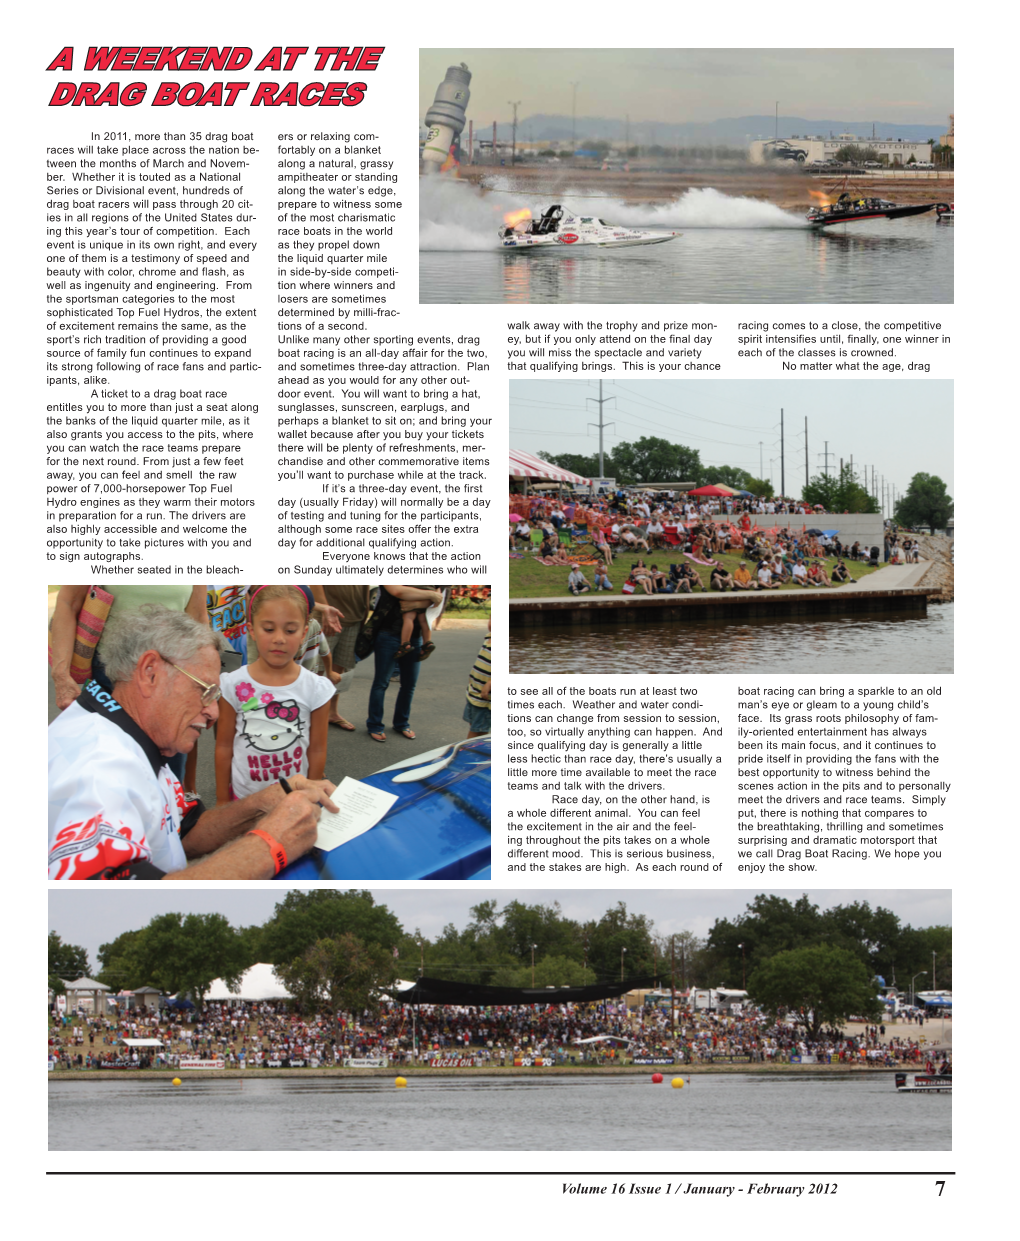 A Weekend at the Drag Boat Races